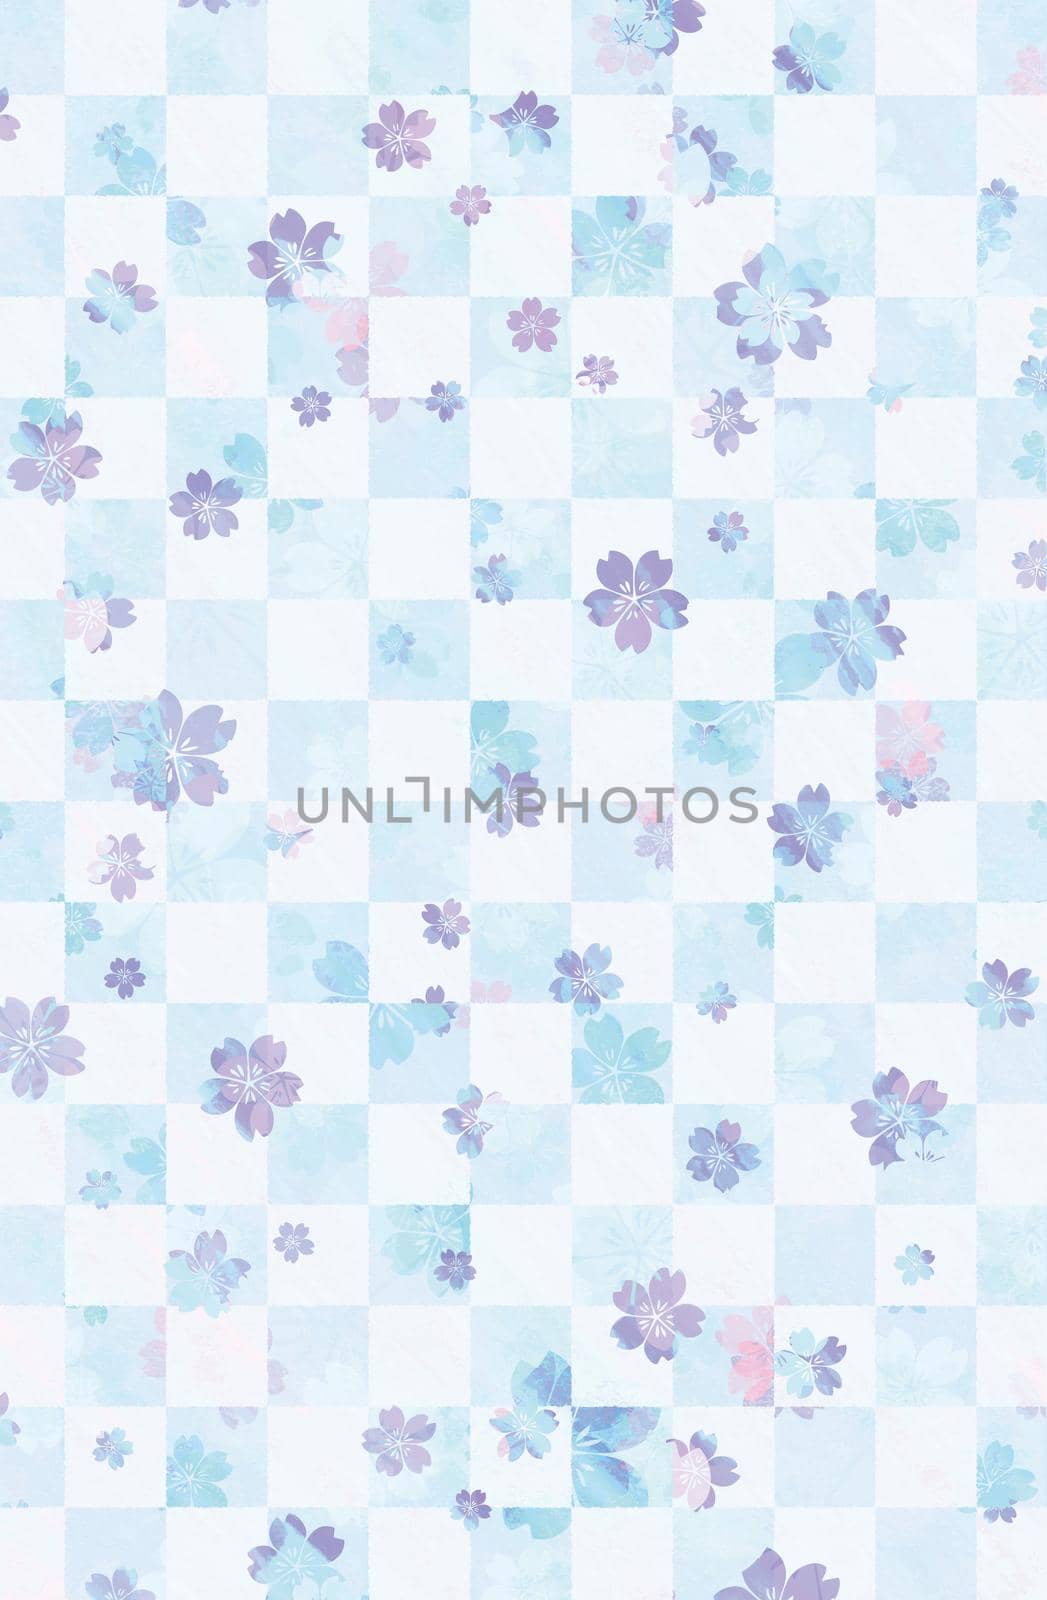 Water painting checked pattern with cherry blossoms / New year greeting card's template / spring background by barks